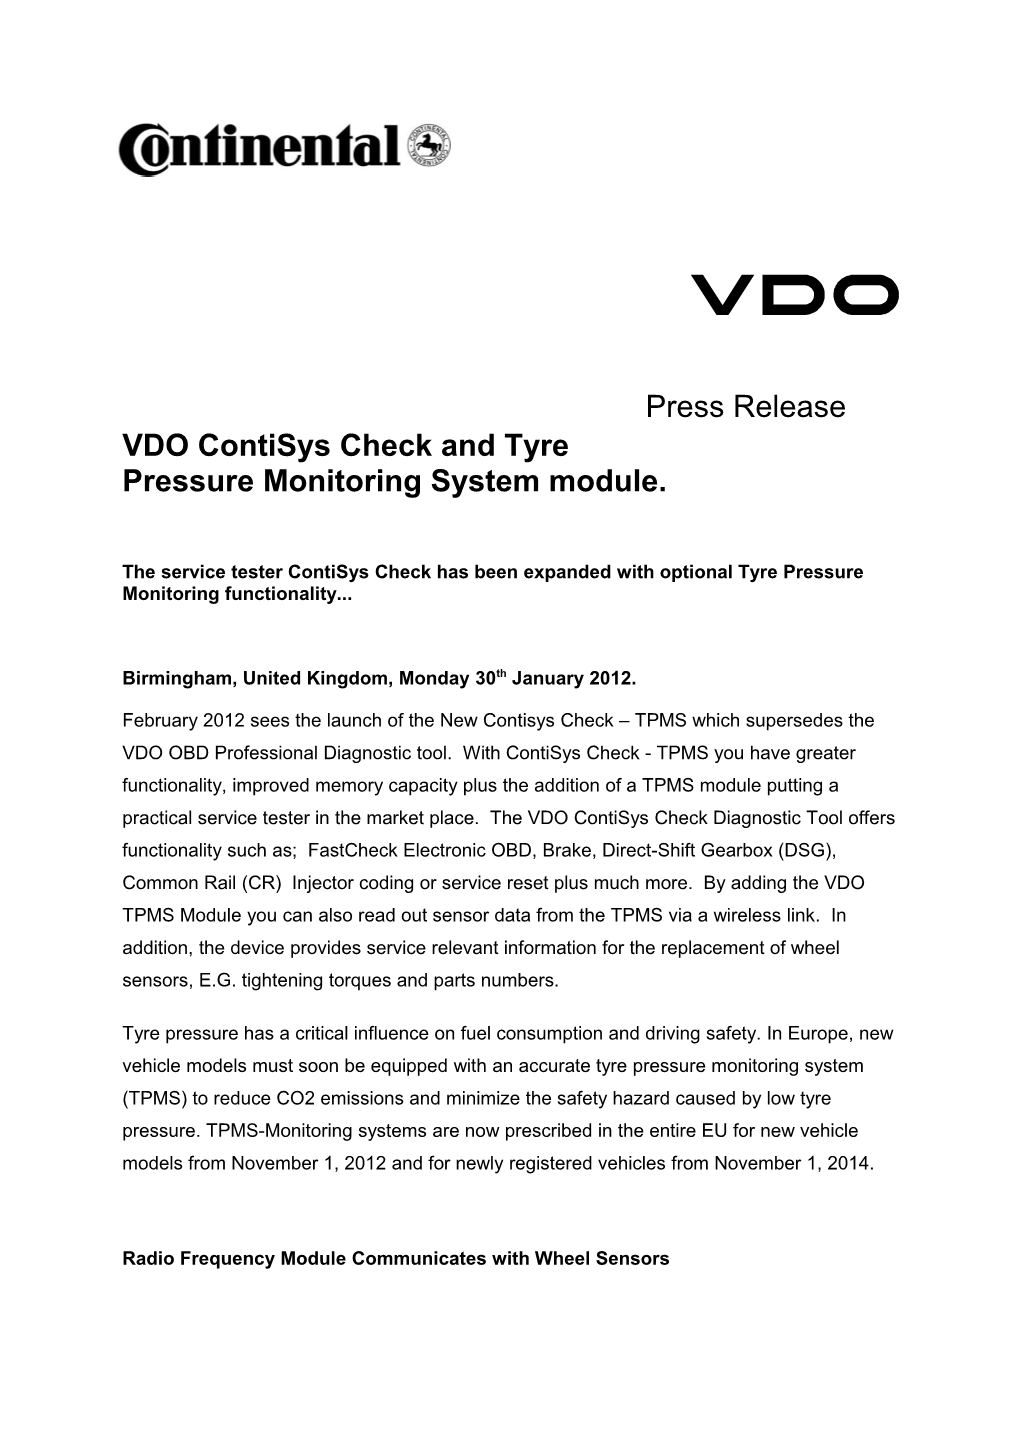 VDO Contisys Check and Tyre Pressure Monitoring System Module